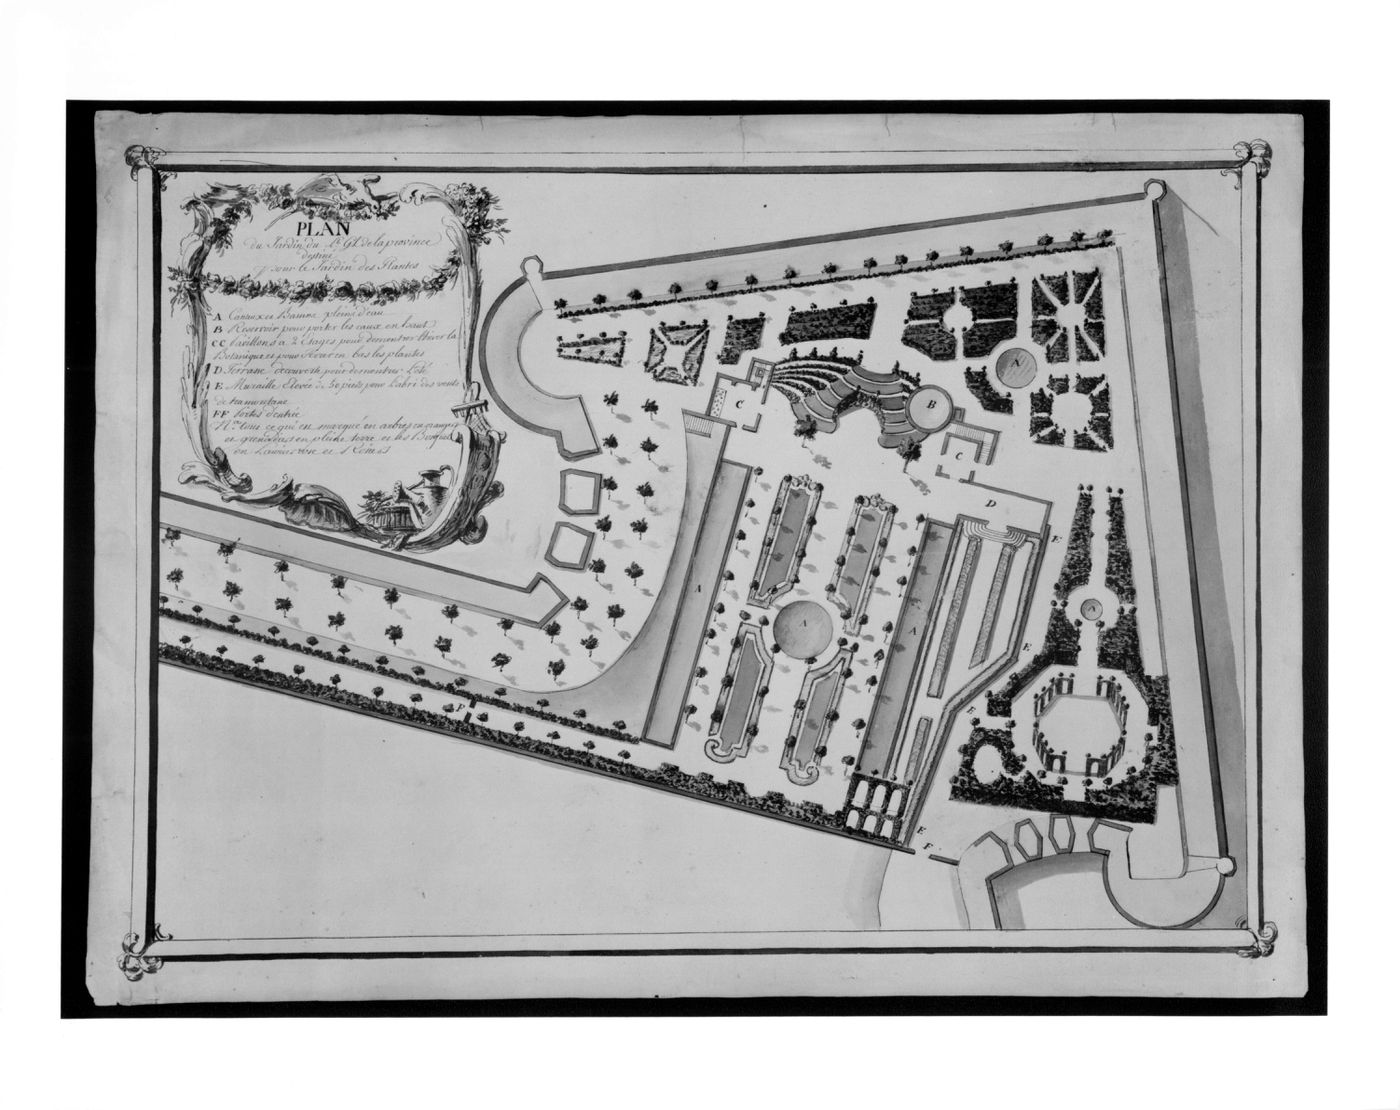 Detail for a proposed garden within the fortifications at Perpignan